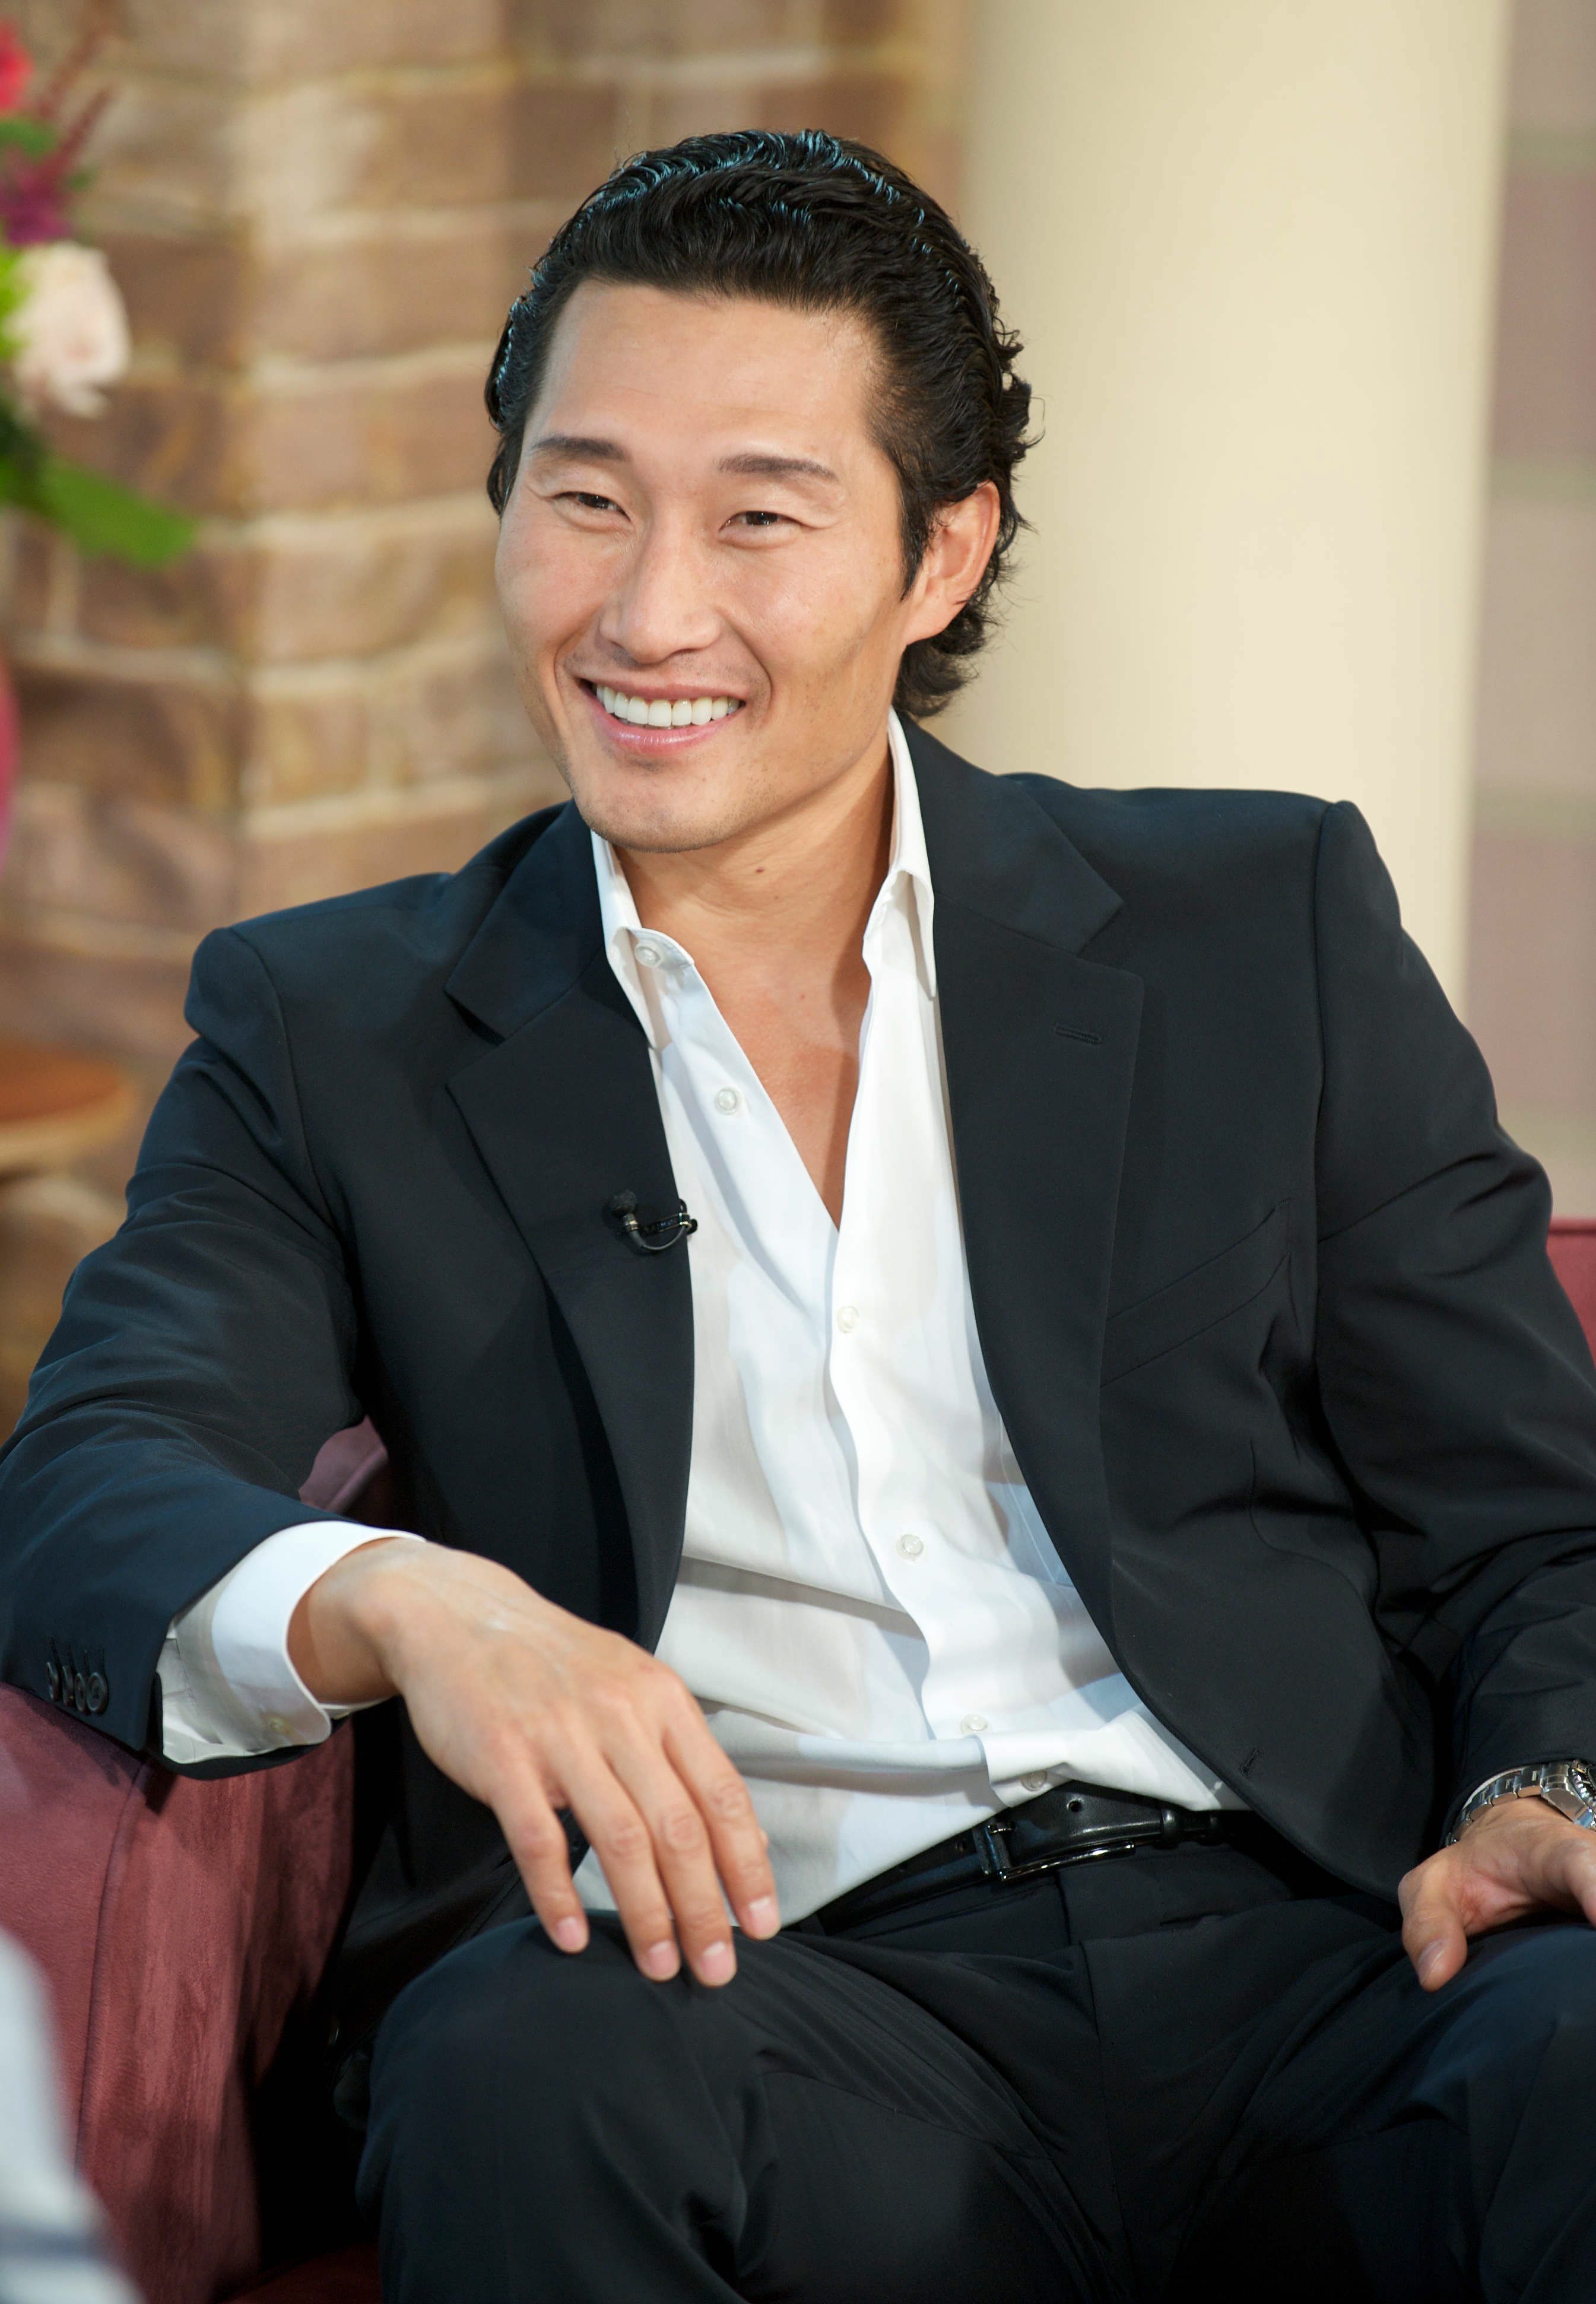 Hawaii Five-O's Daniel Dae Kim Opens Up About His Decision To Leave CBS